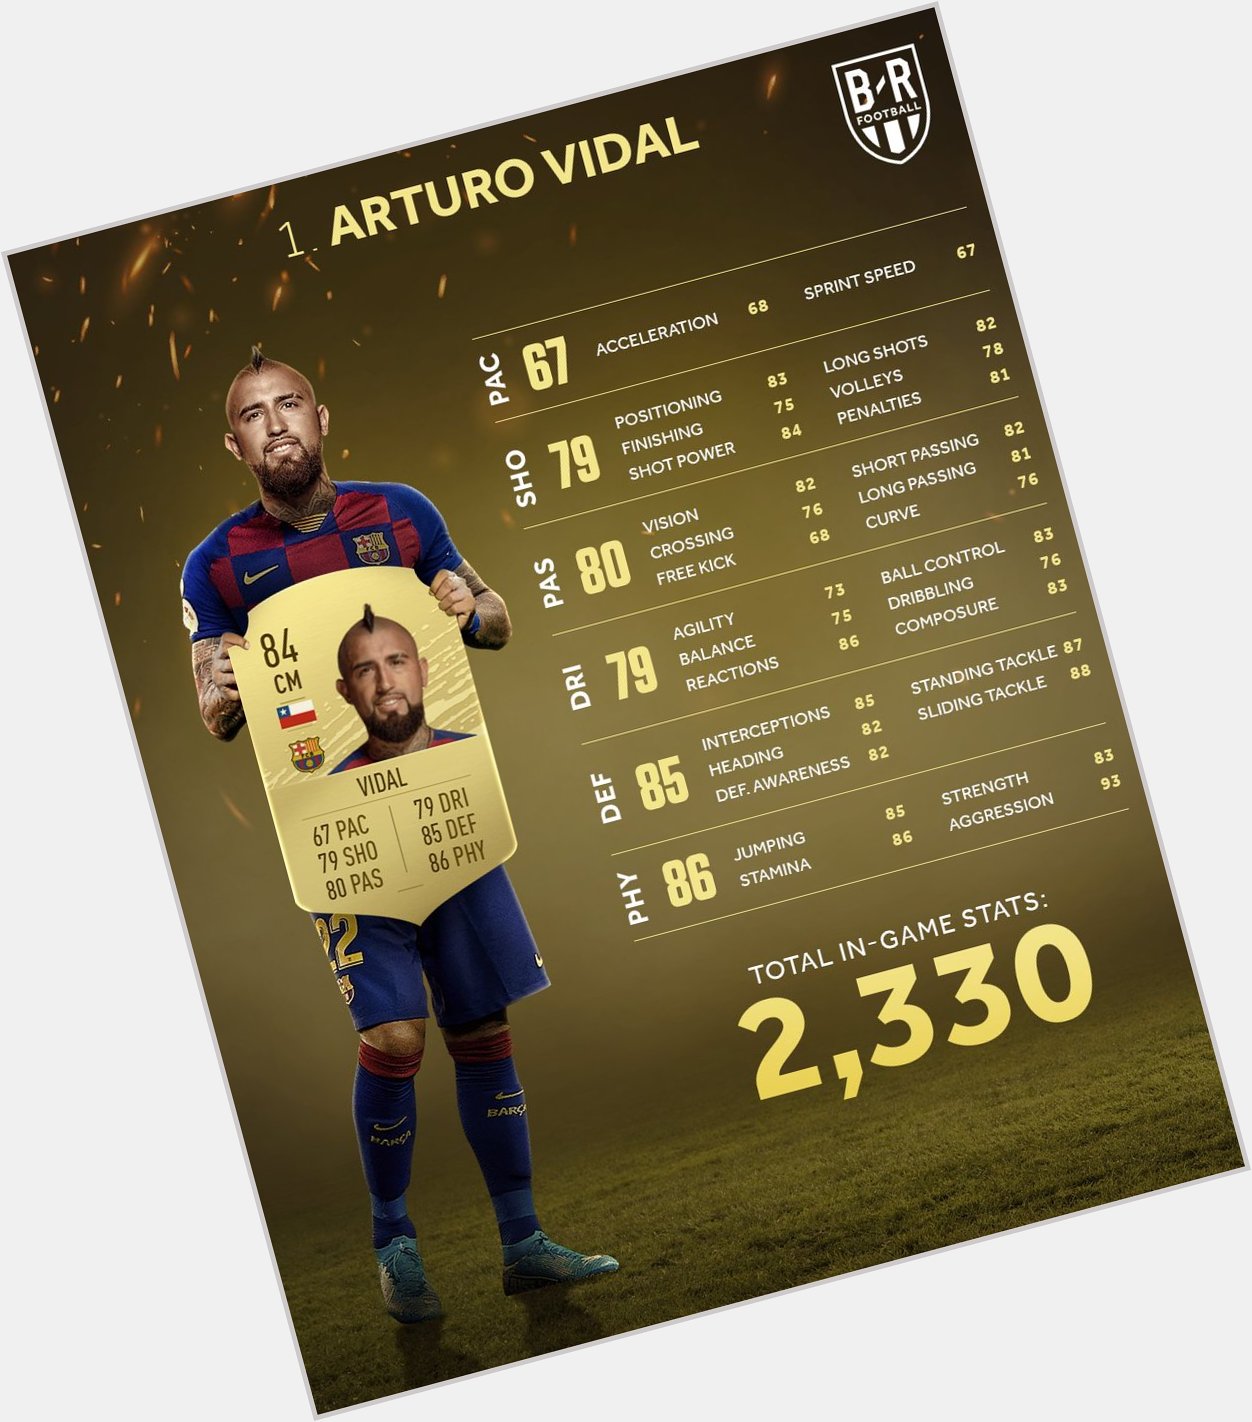 Happy birthday to Arturo Vidal, the man with the best total stats on  